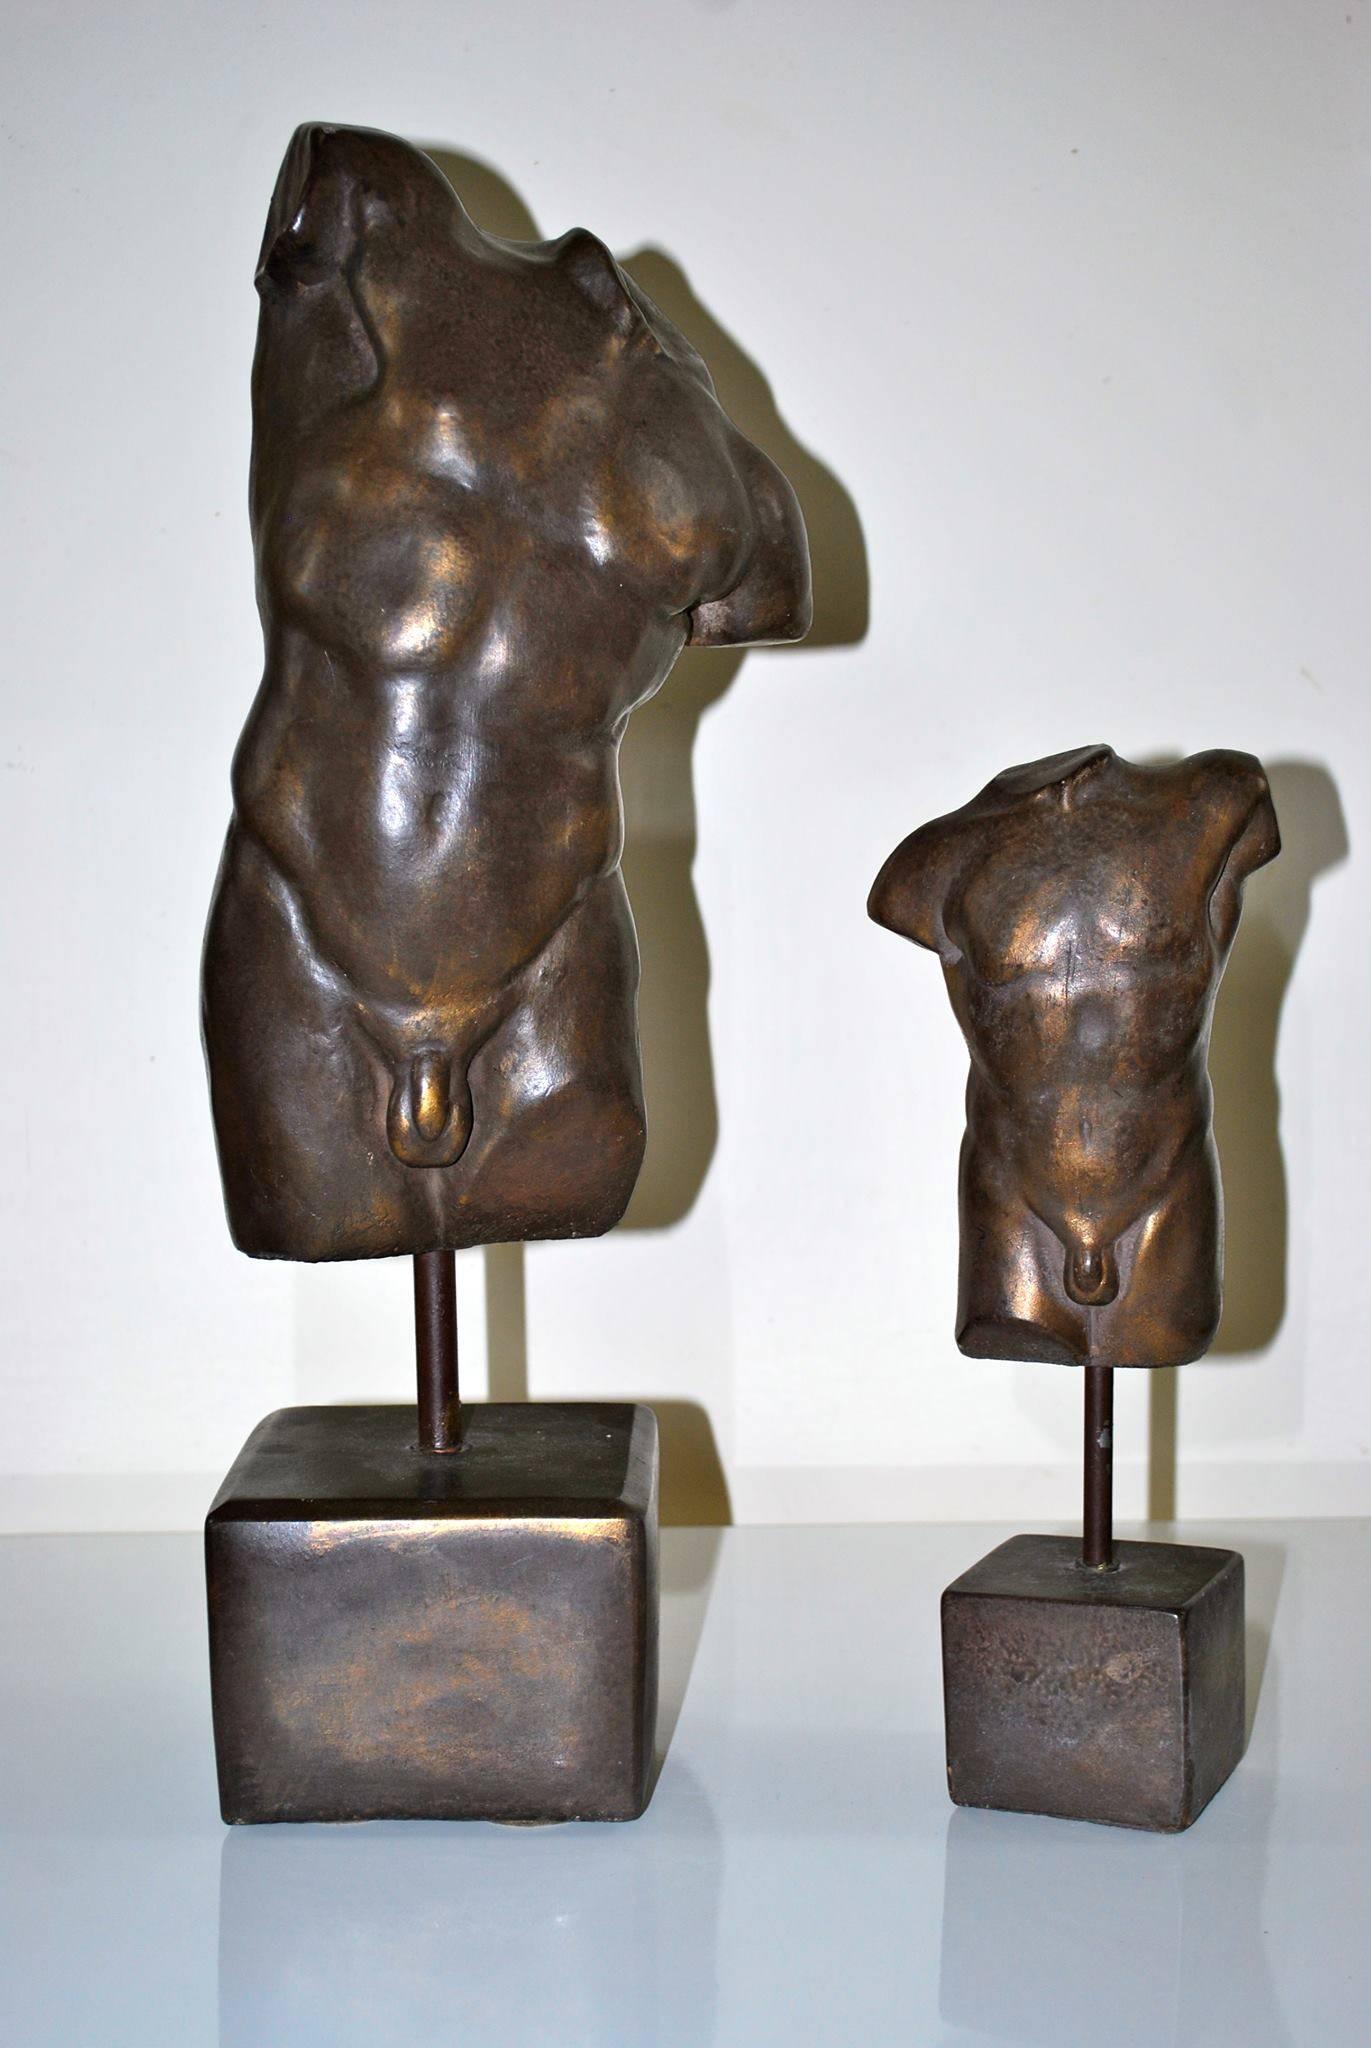 Pair of Classical bronze male torso sculptures, midcentury.
Measures: 47 cm and 29cm high.